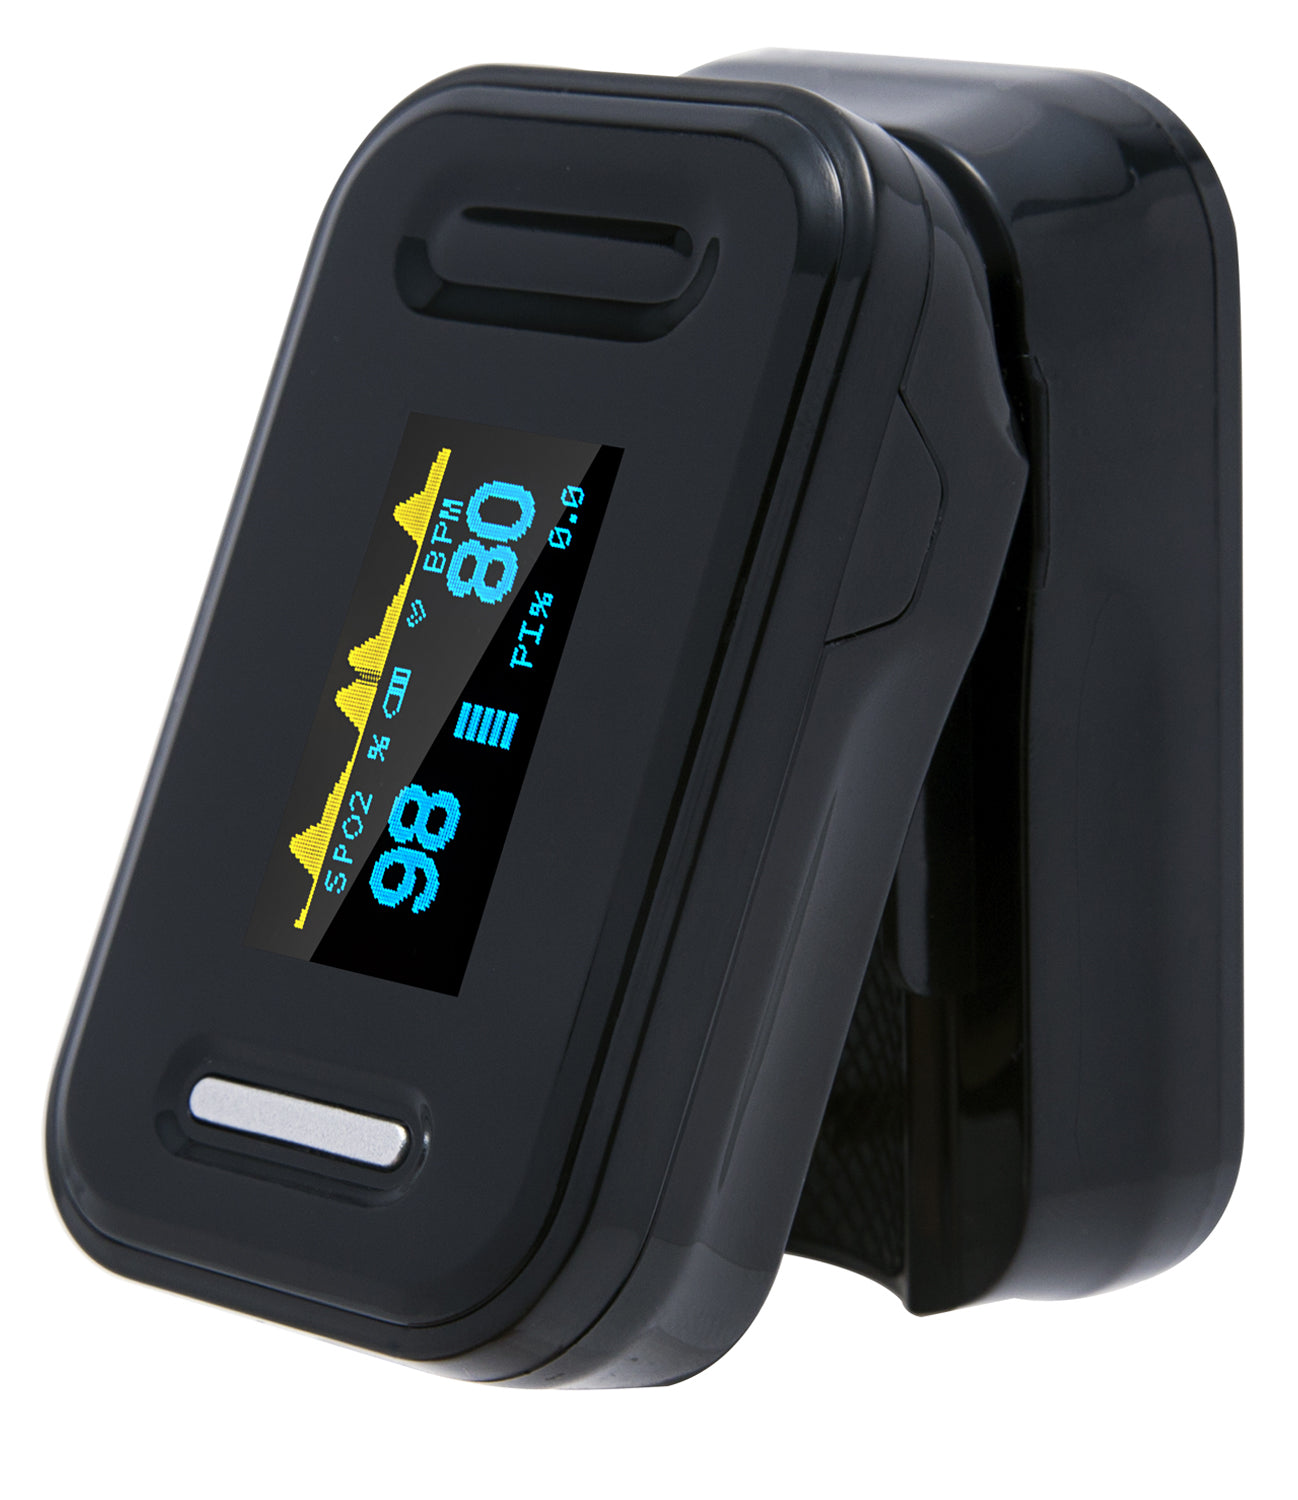 Pulse Oximeter UK, CE 0123 Certified, Oximeter adhere to NHS Guidance, OLED Big Display, Fingertip Oxygen Saturation Level Monitor for All Age Group, Accurate Fast Result & Easy Reading (6838798450787)